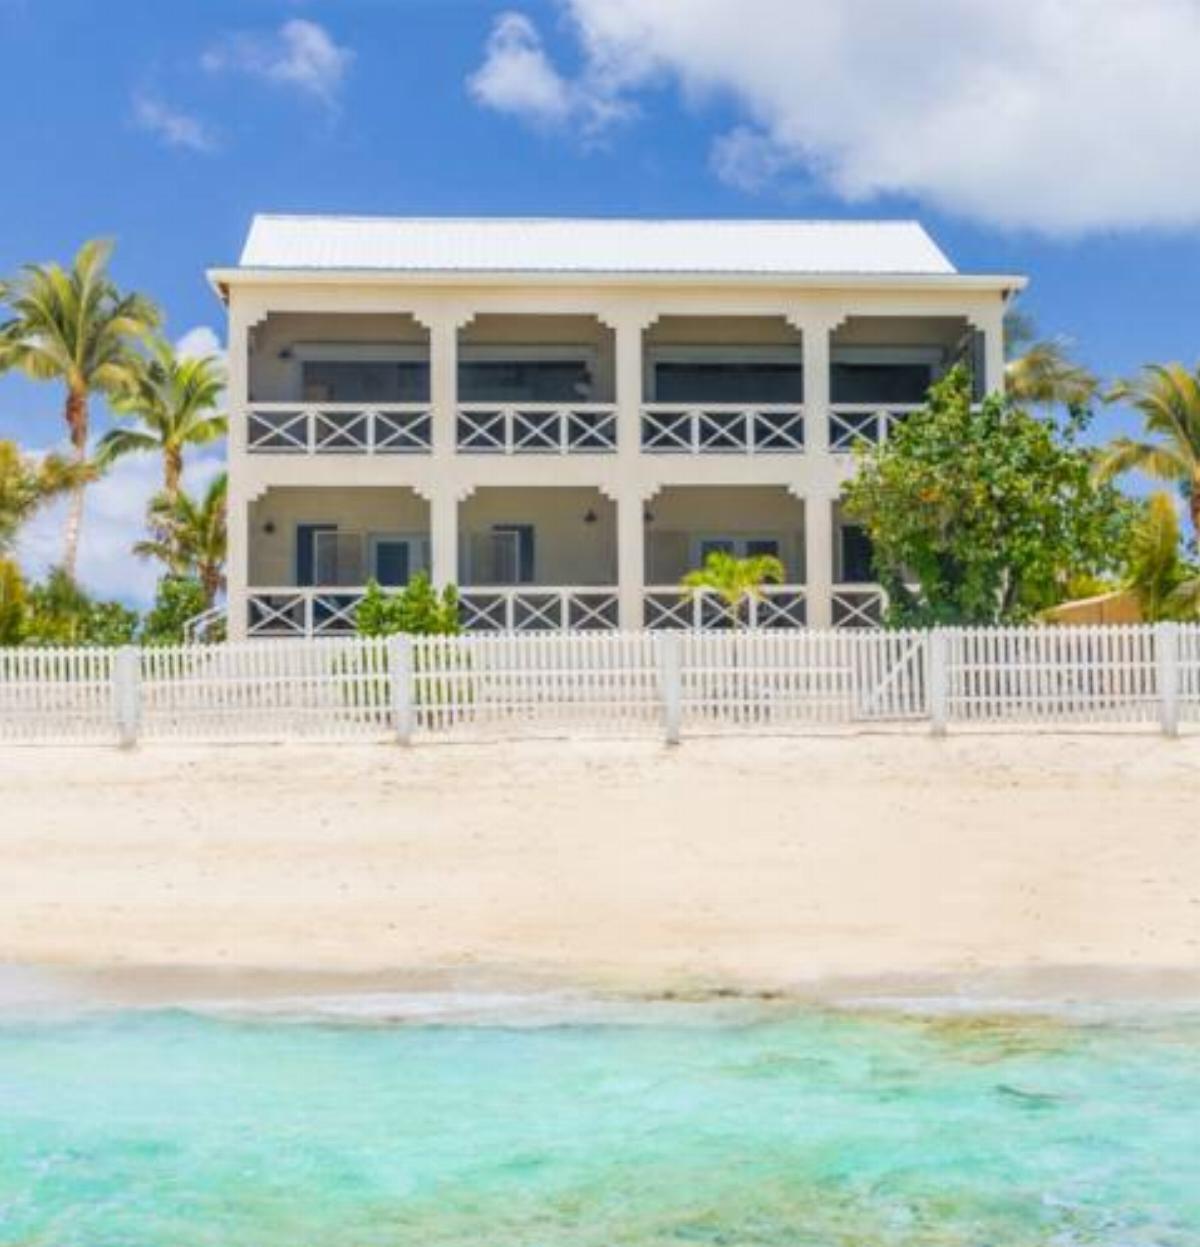 Reef House South Hotel Grand Turk Turks and Caicos Islands